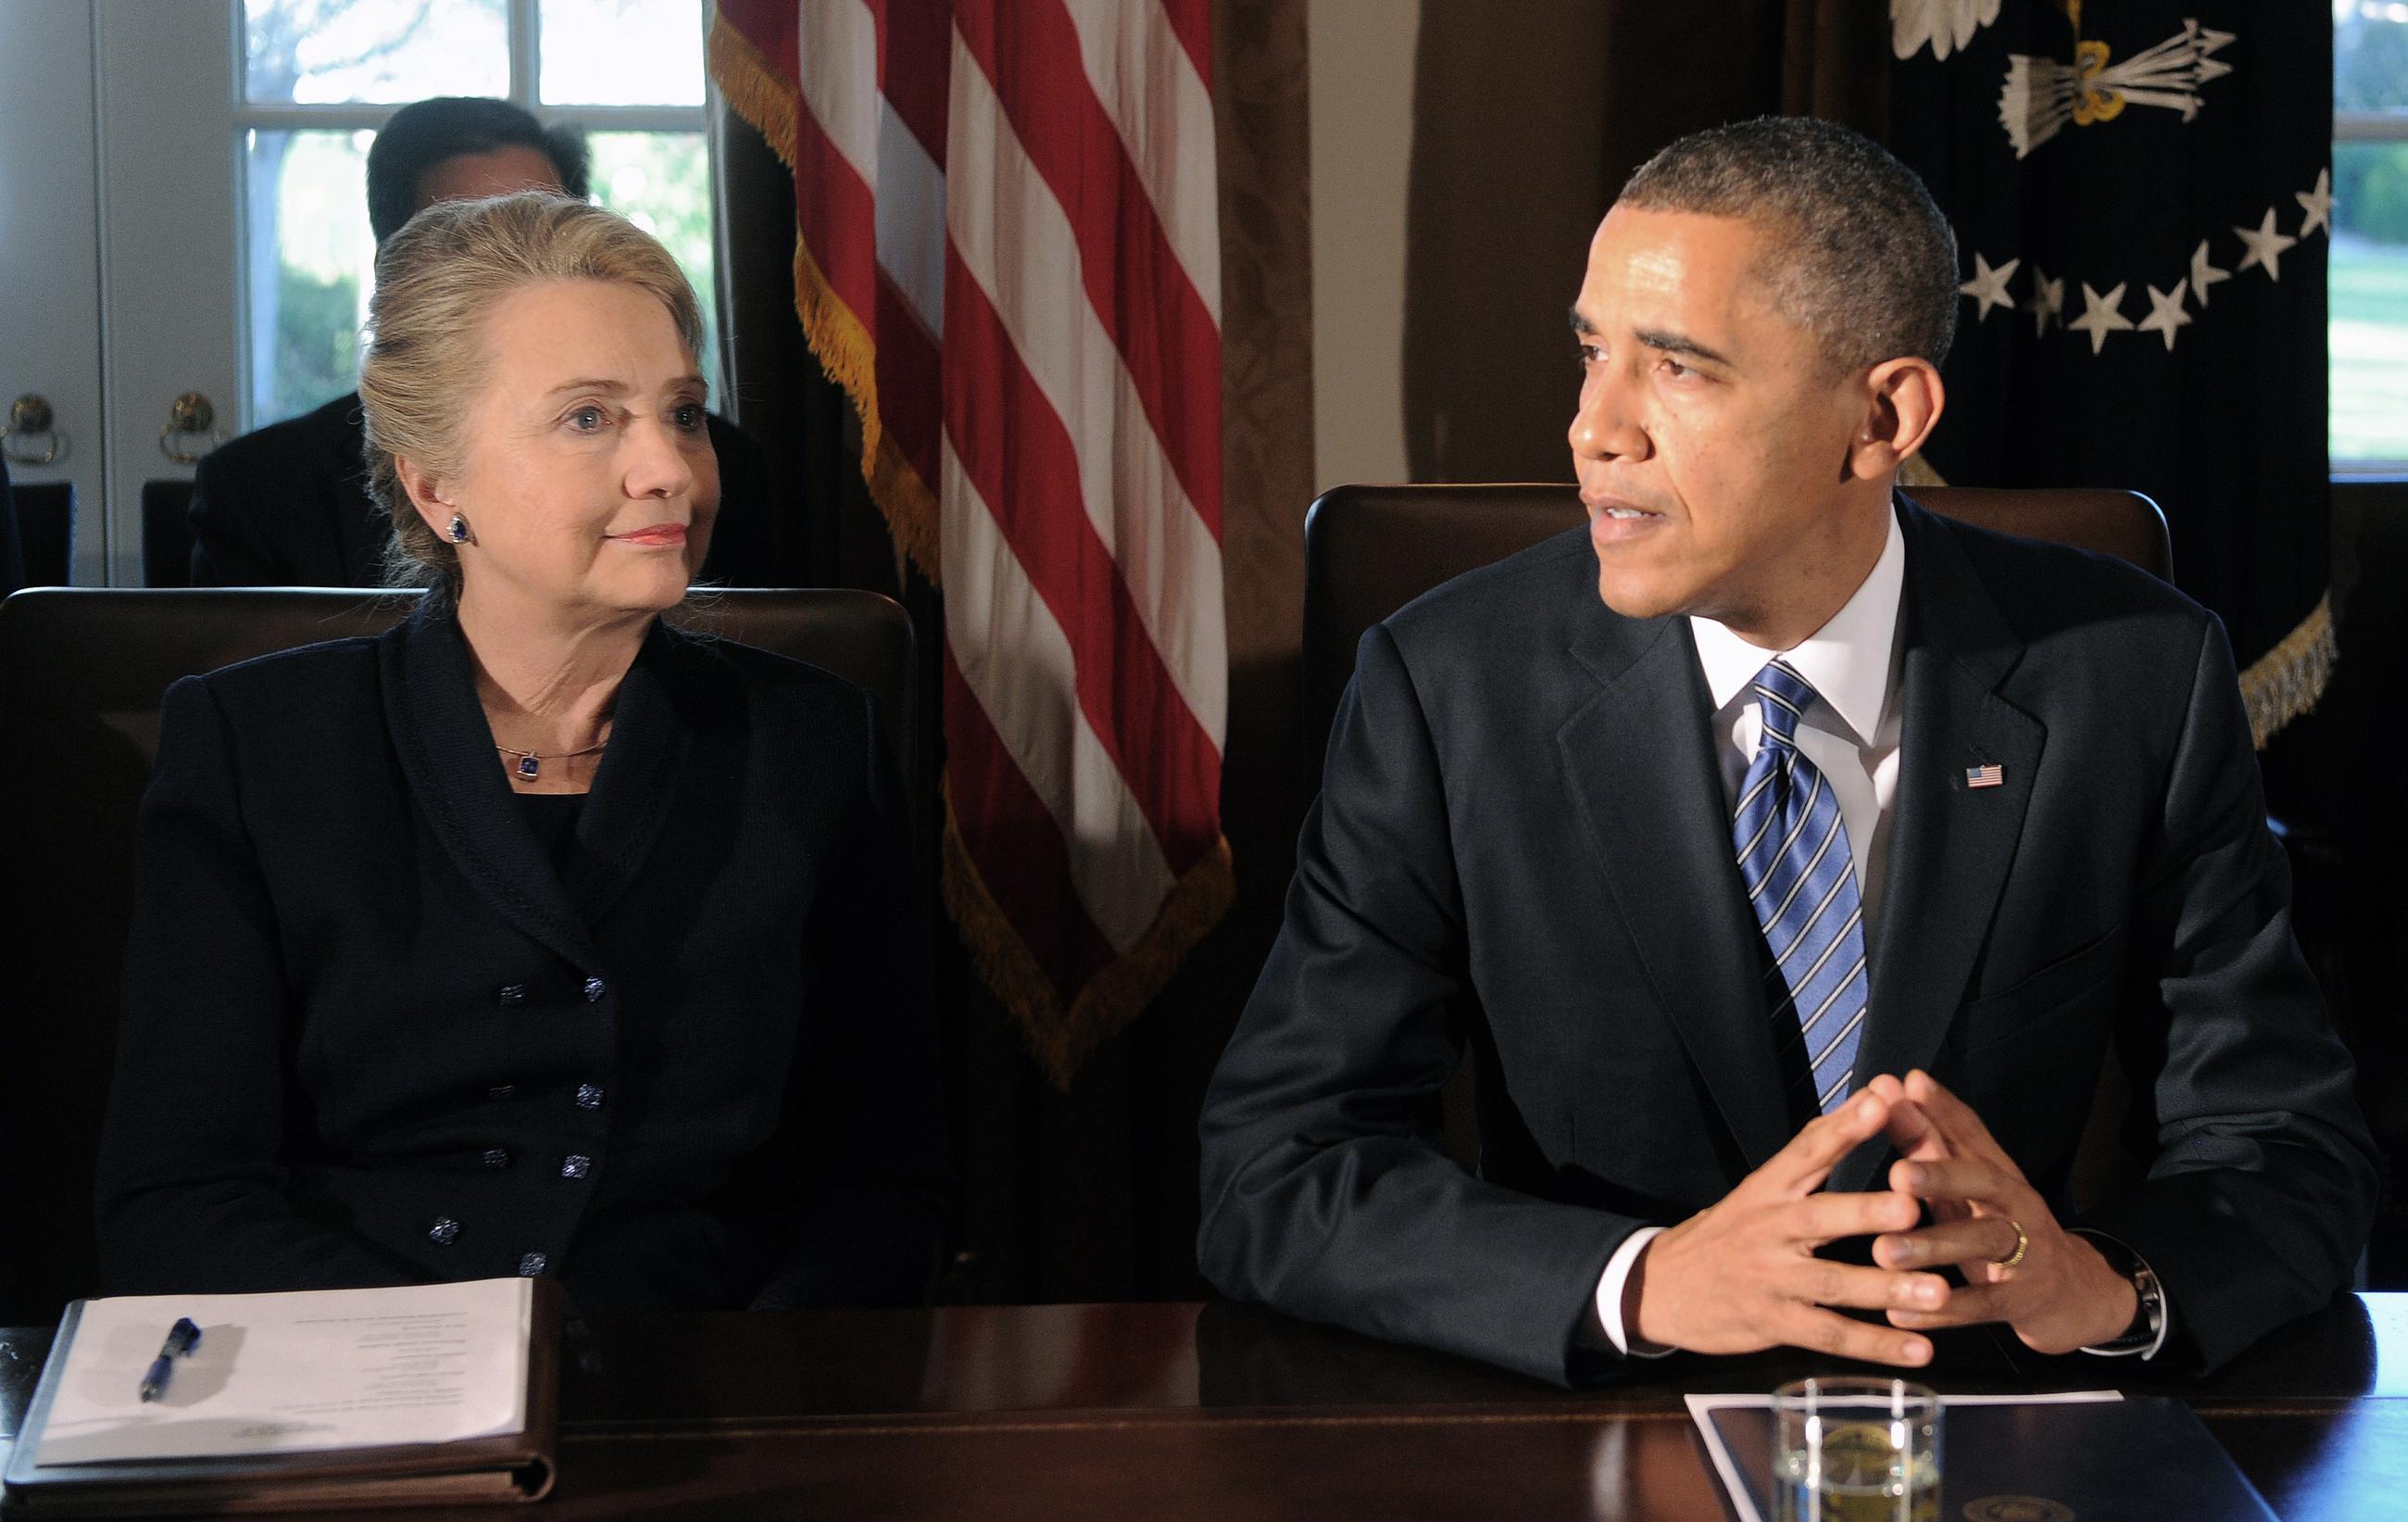 Obama Is Setting Up Hillary Clinton To Fail